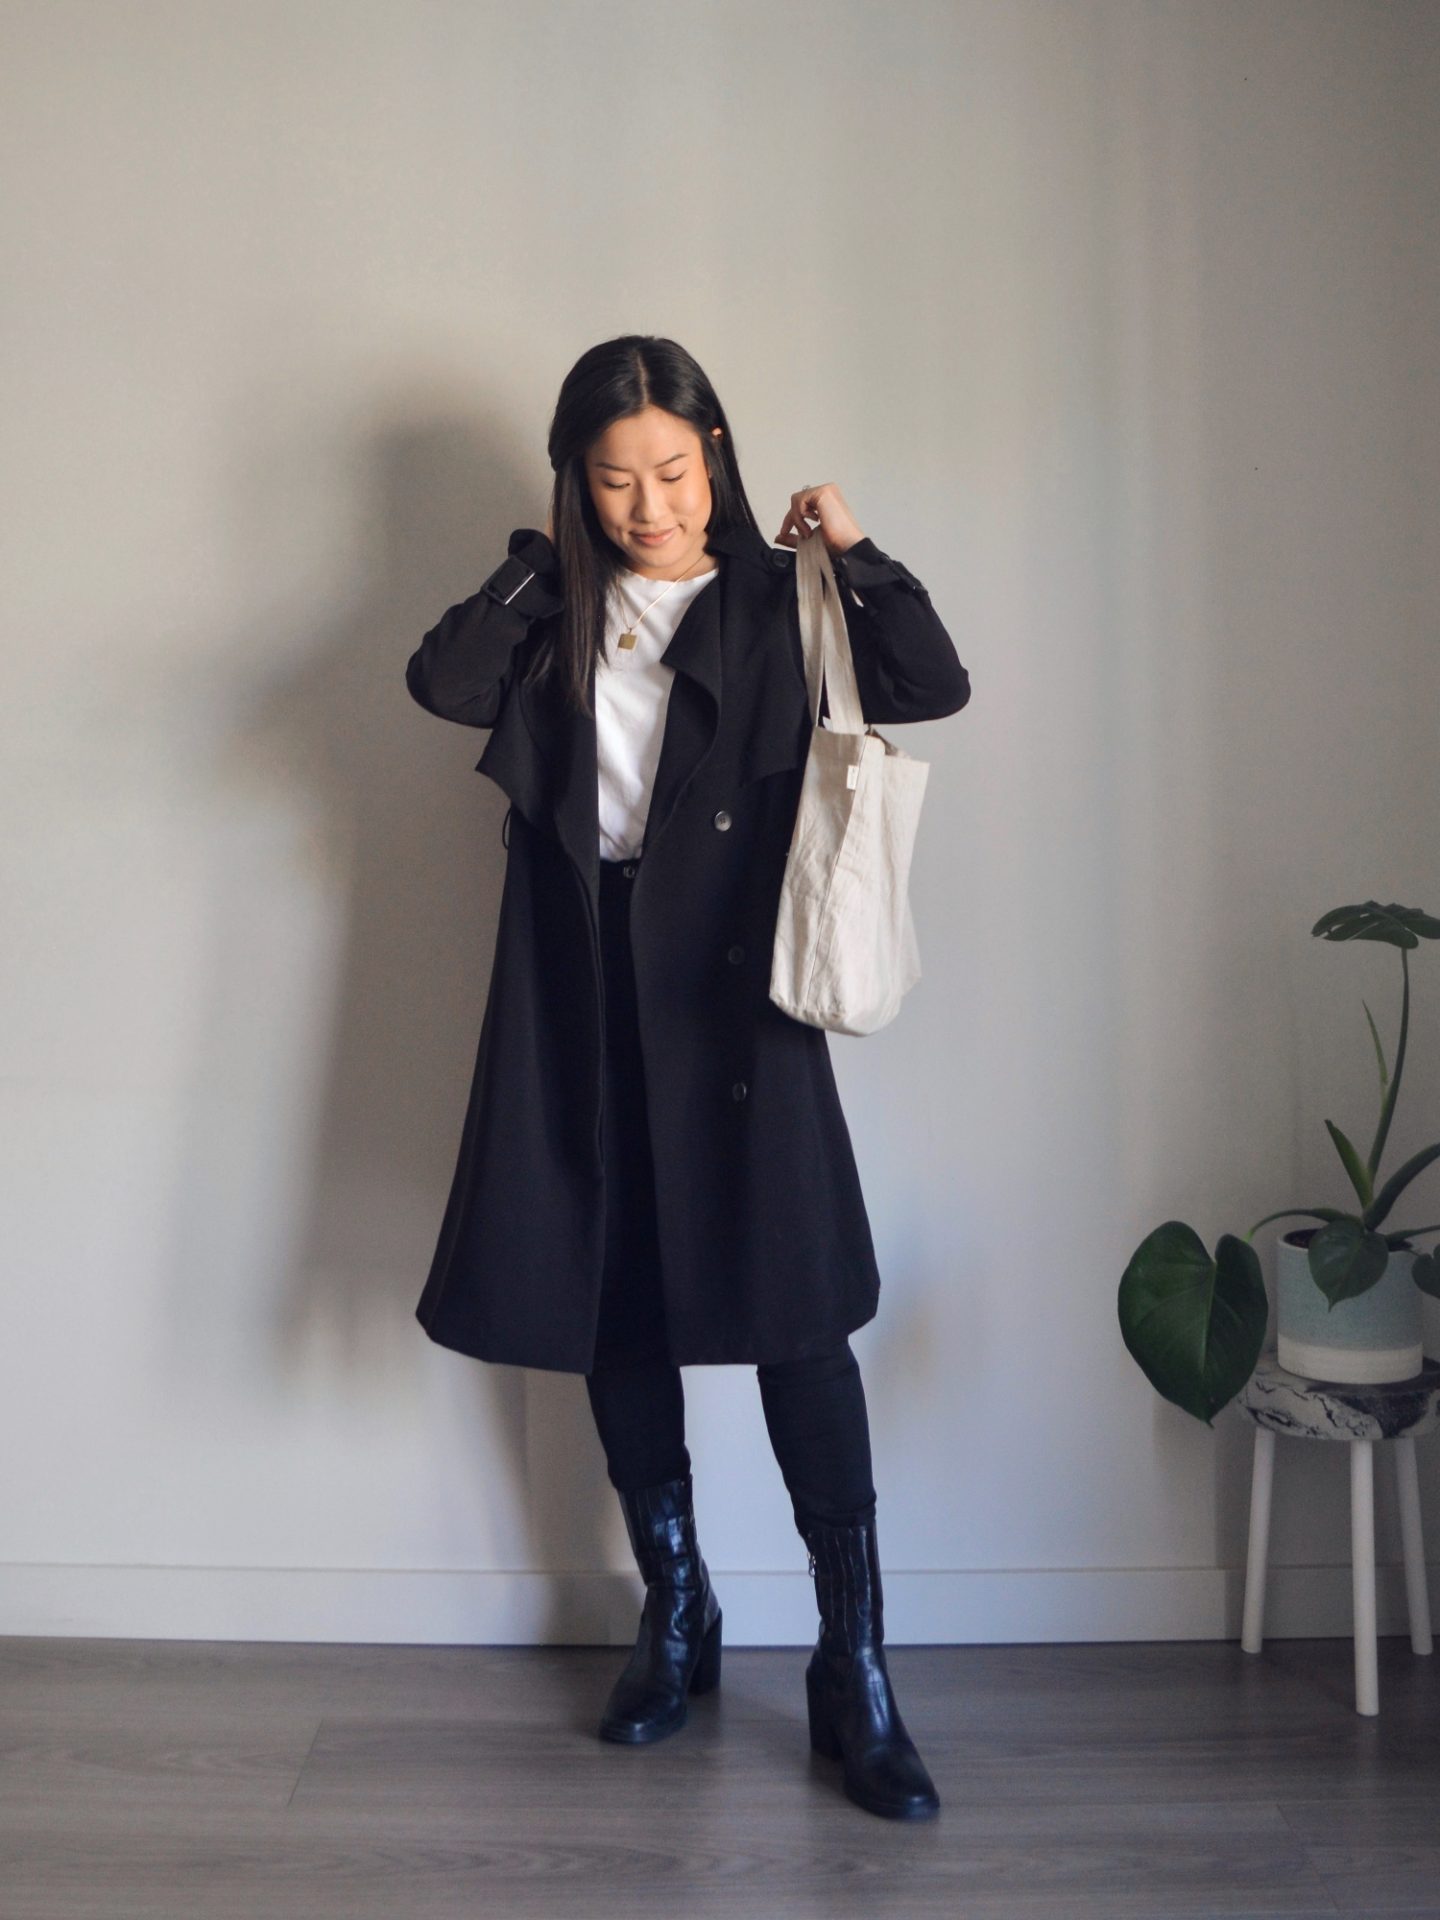 Outfit details: black trench coat, white t-shirt, black skinny jeans, black mid-calf boots